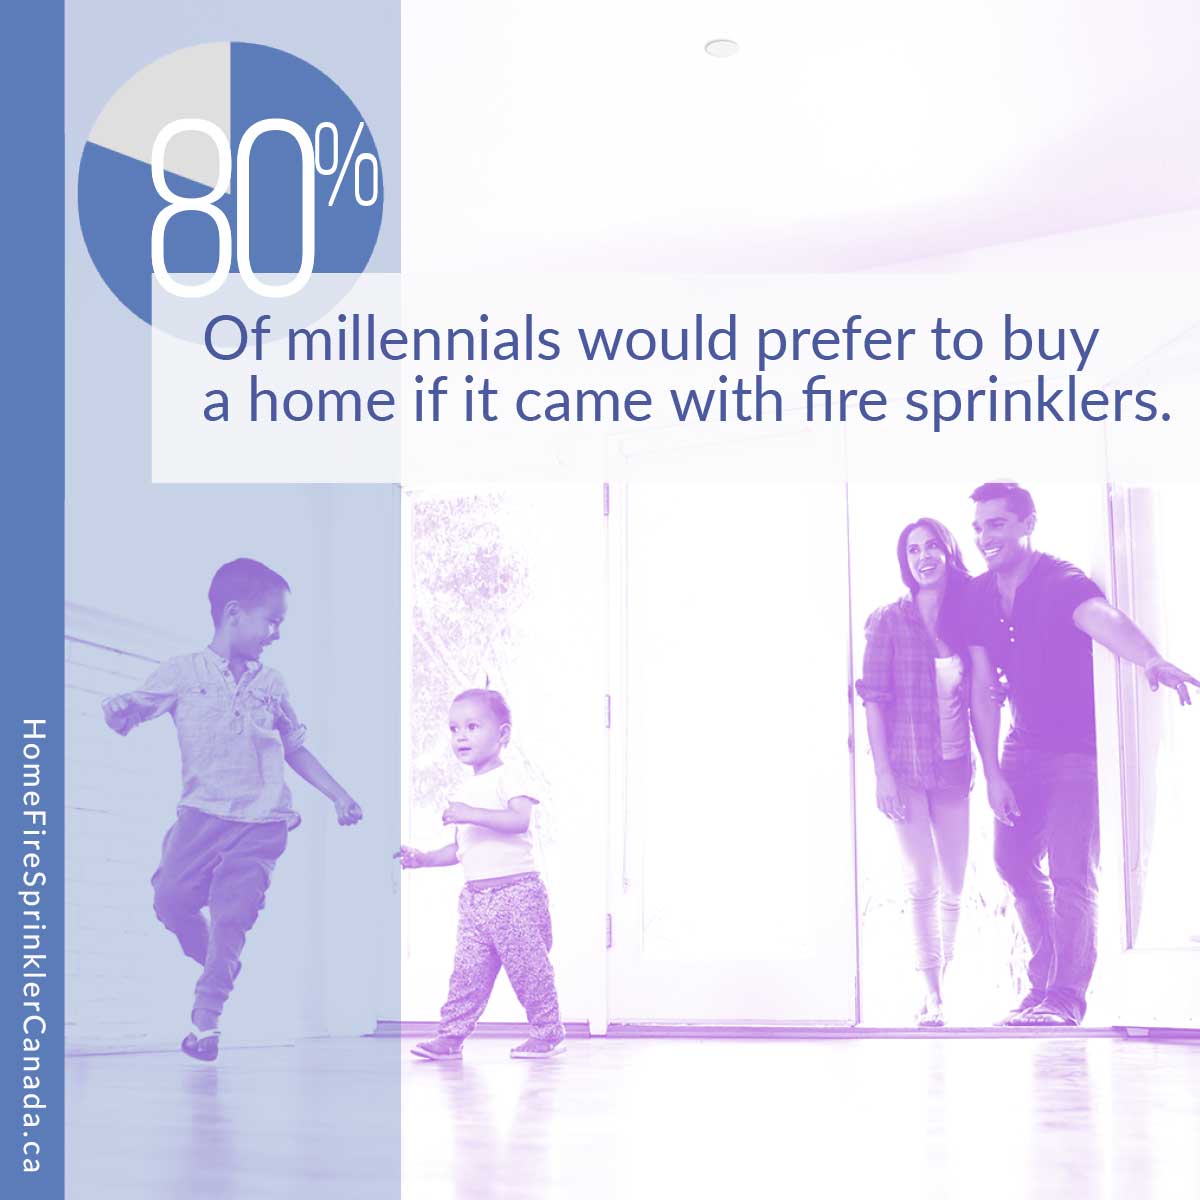 80 percent of millennials would  prefer to buy a home if it came with fire sprinklers.